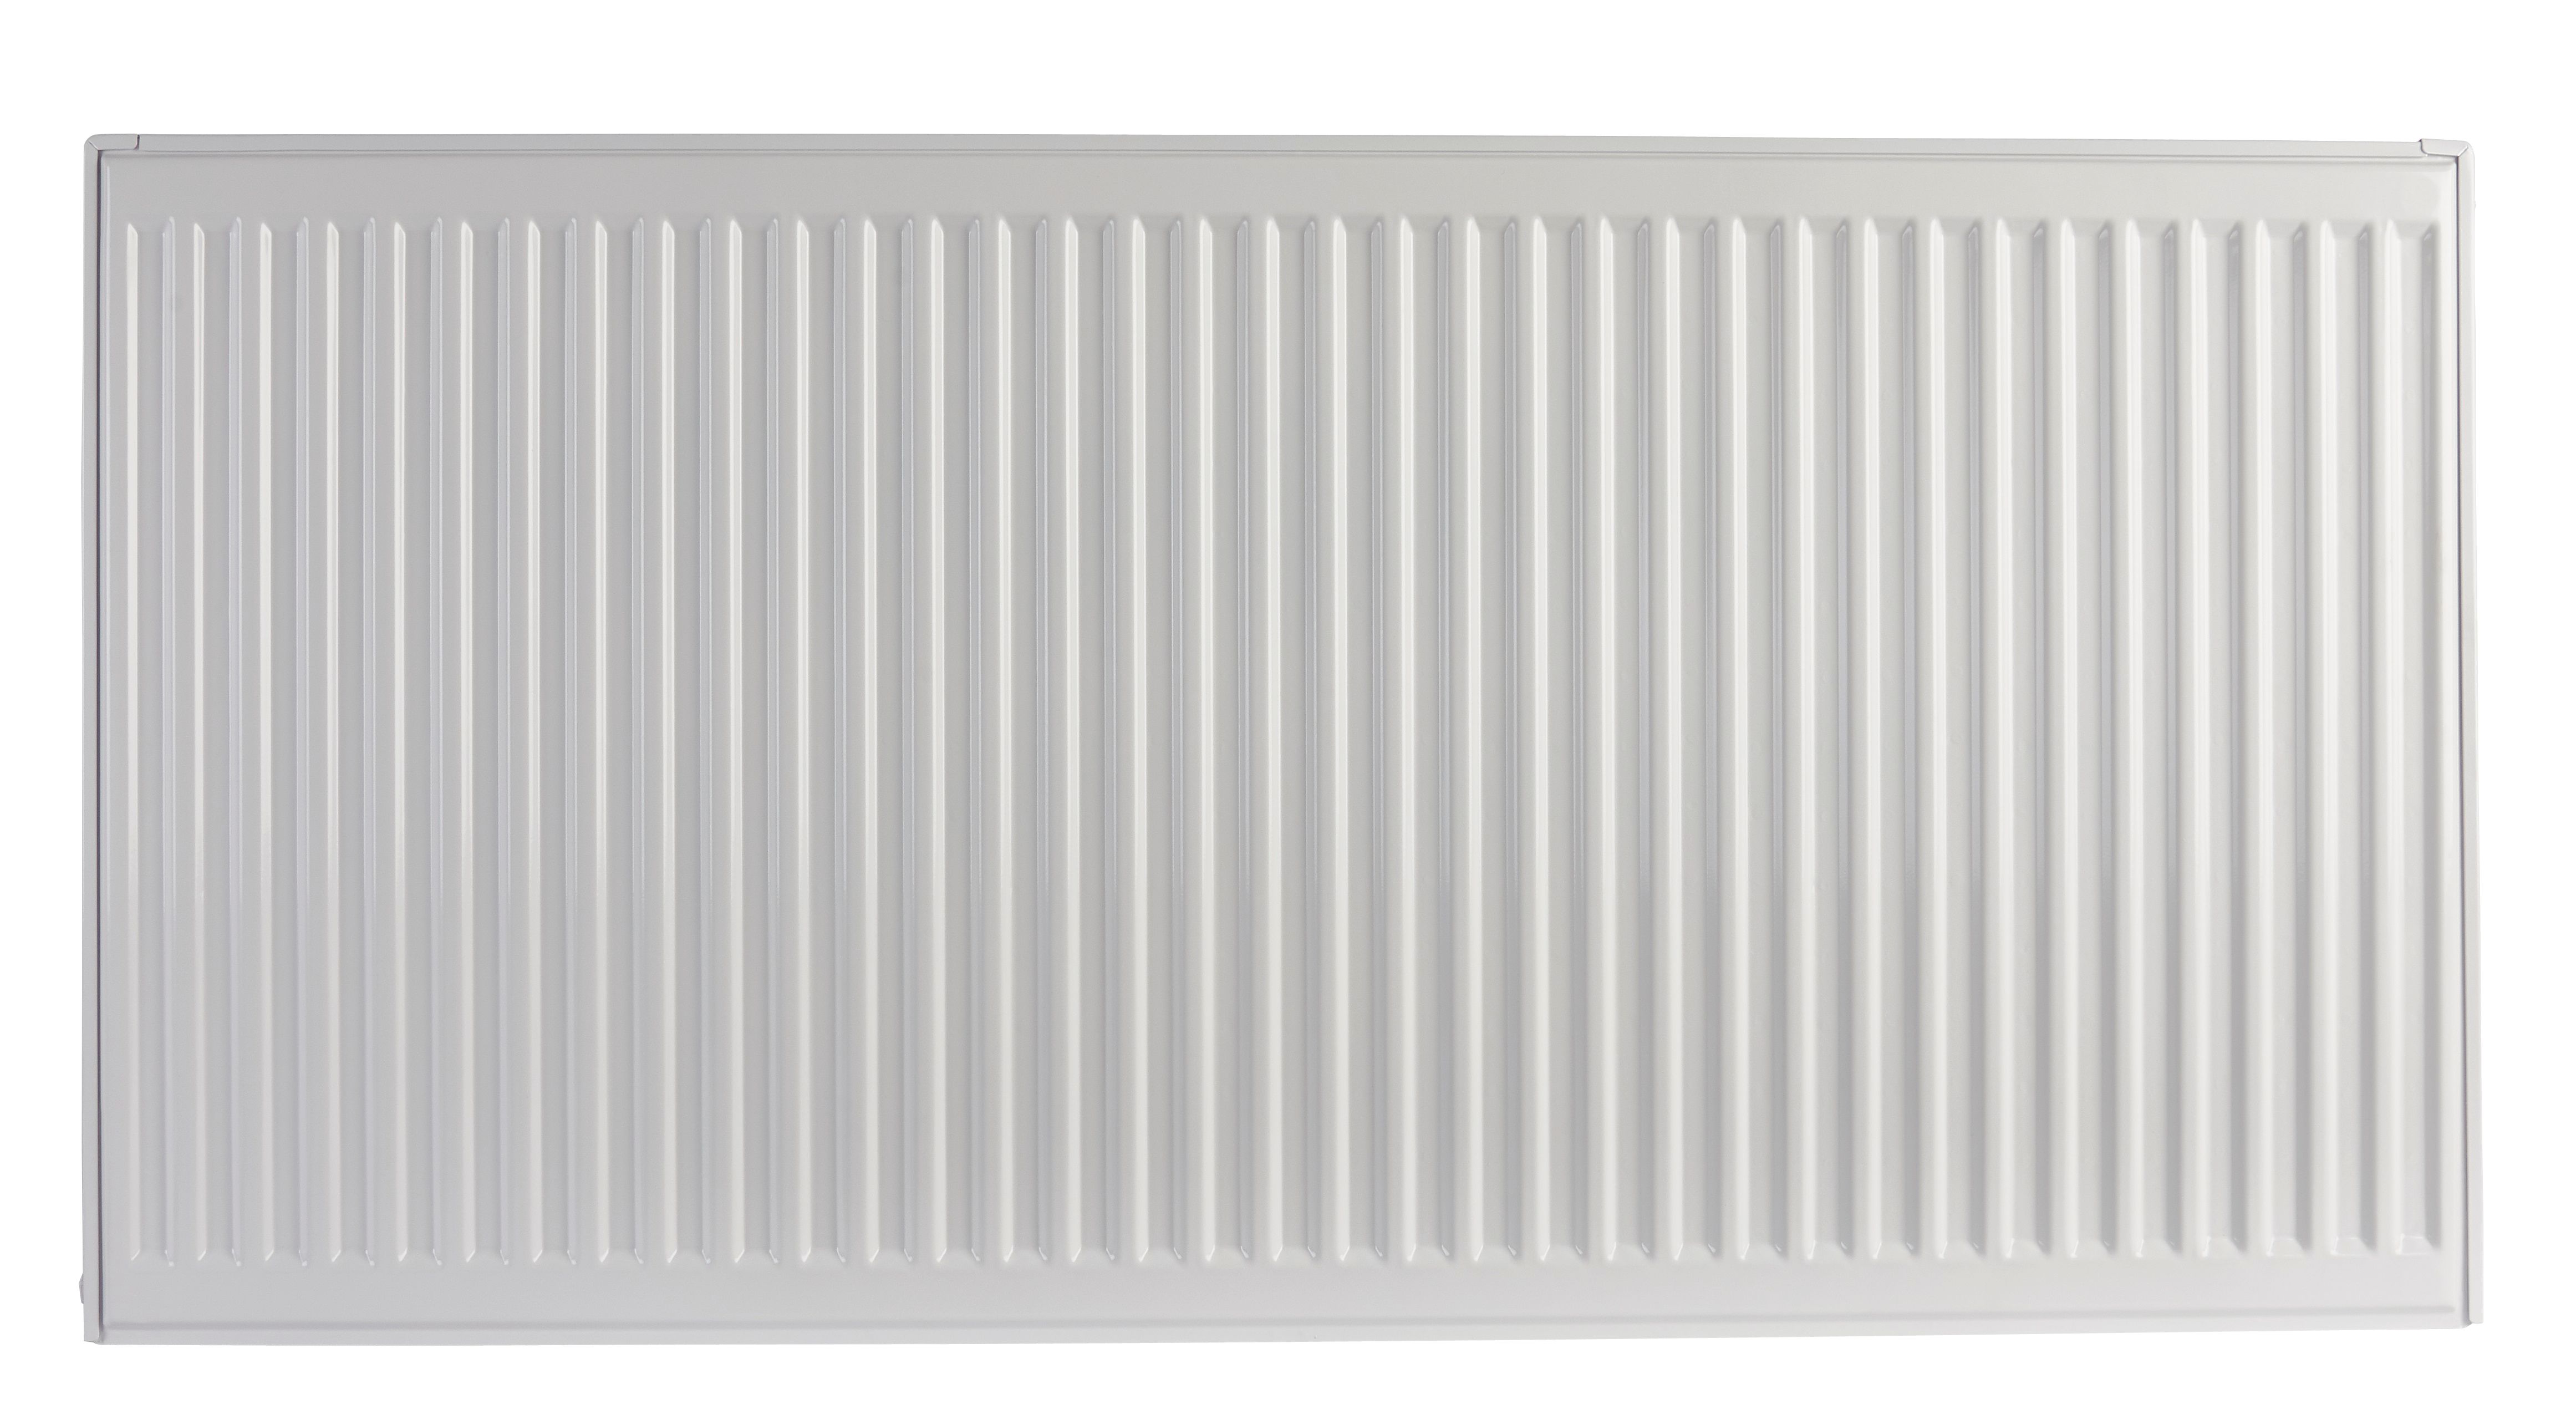 Image of Homeline by Stelrad 700 x 900mm Type 21 Double Panel Plus Single Convector Radiator